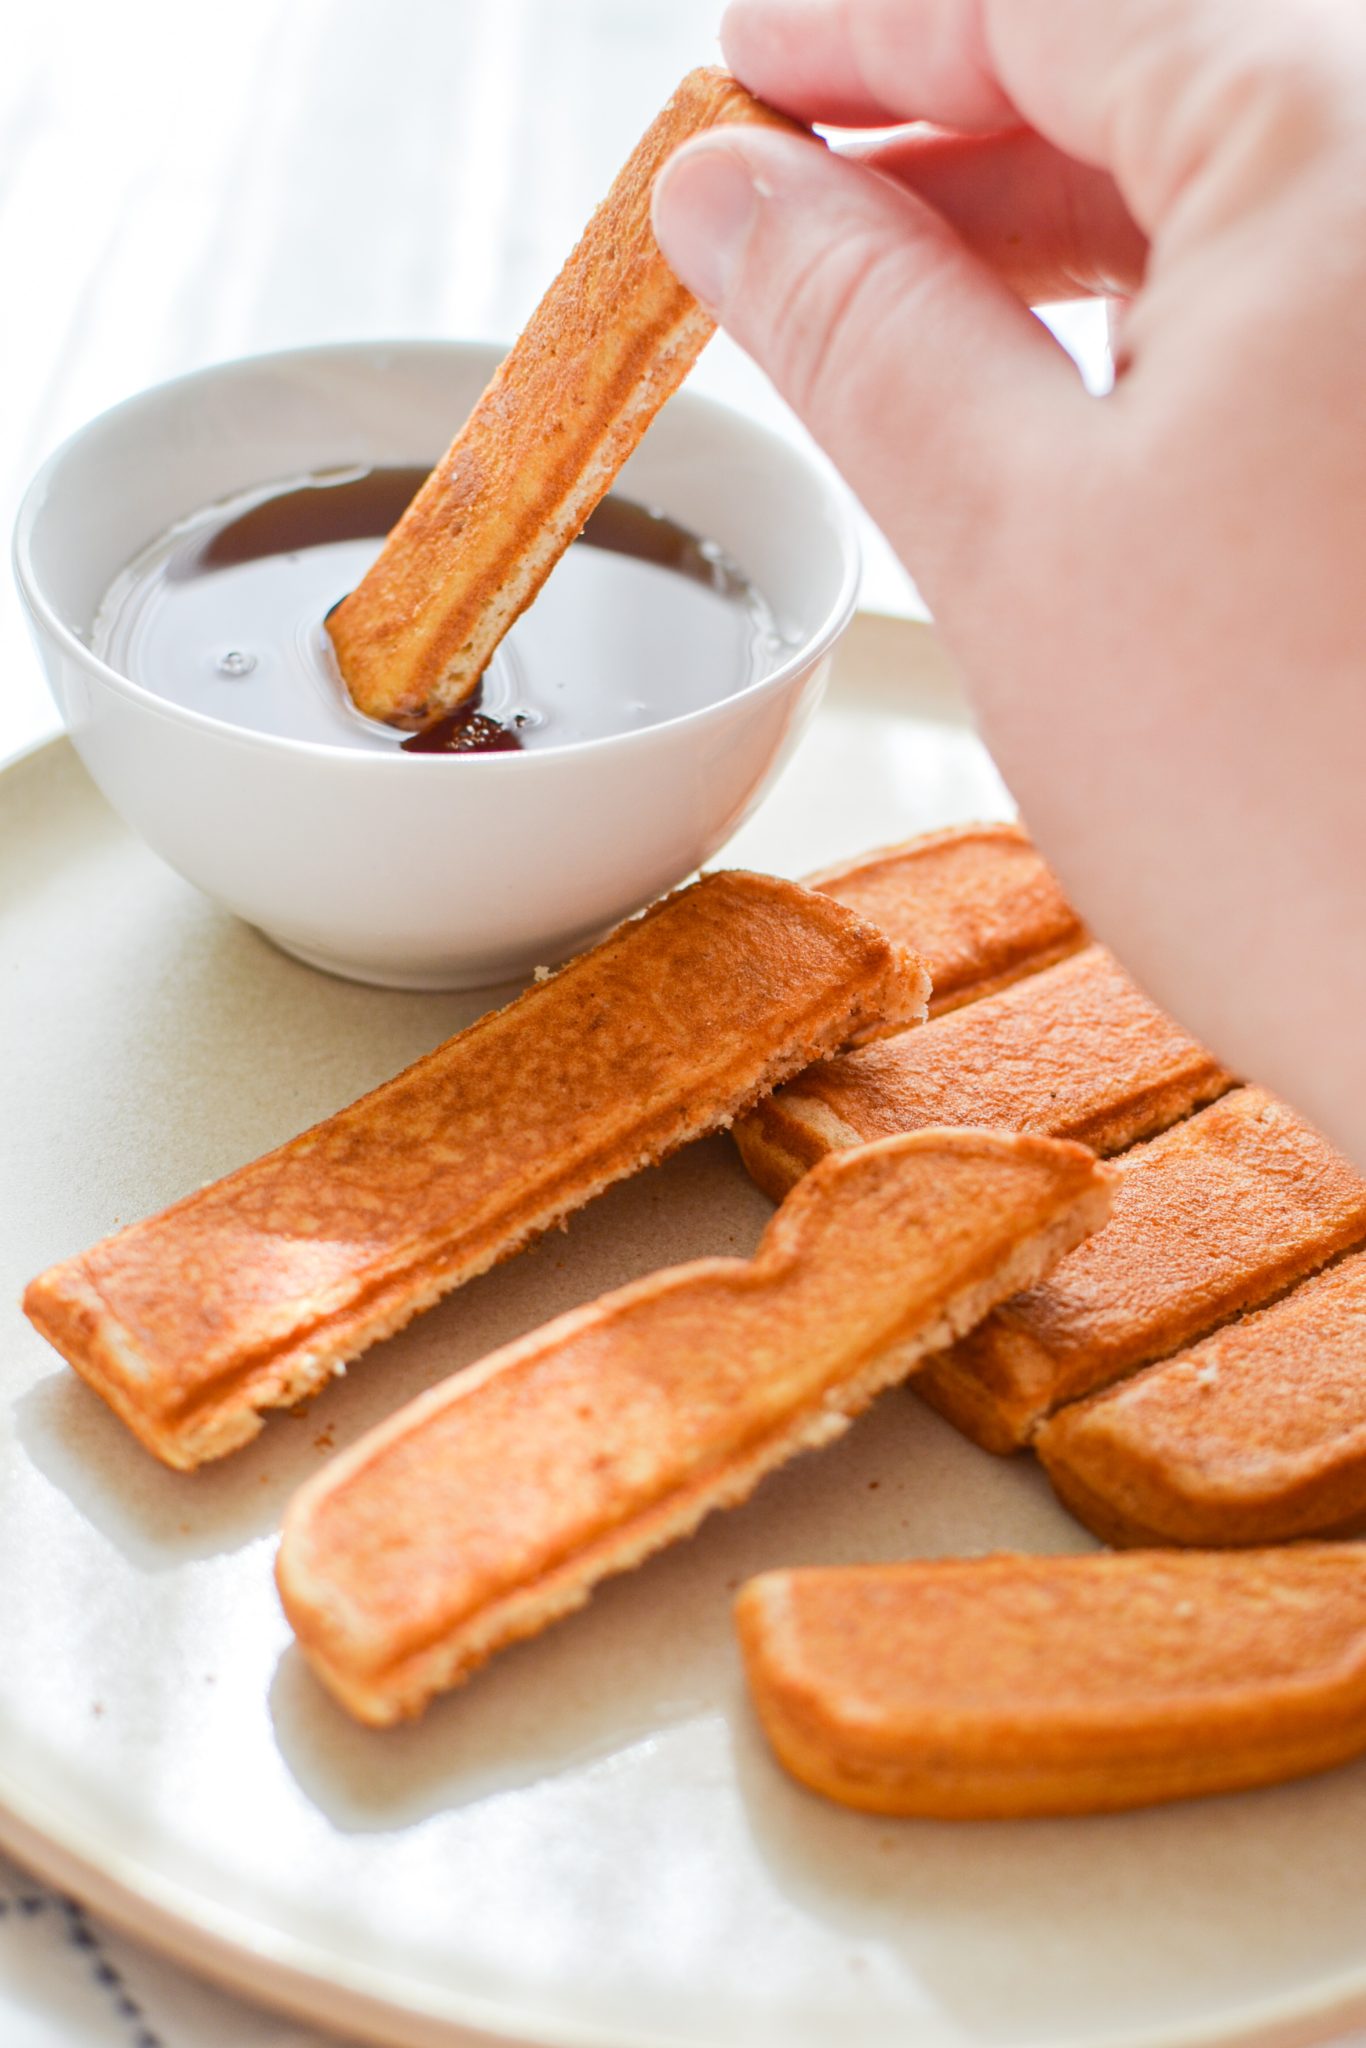 Dipping a French toast stick into maple syrup.